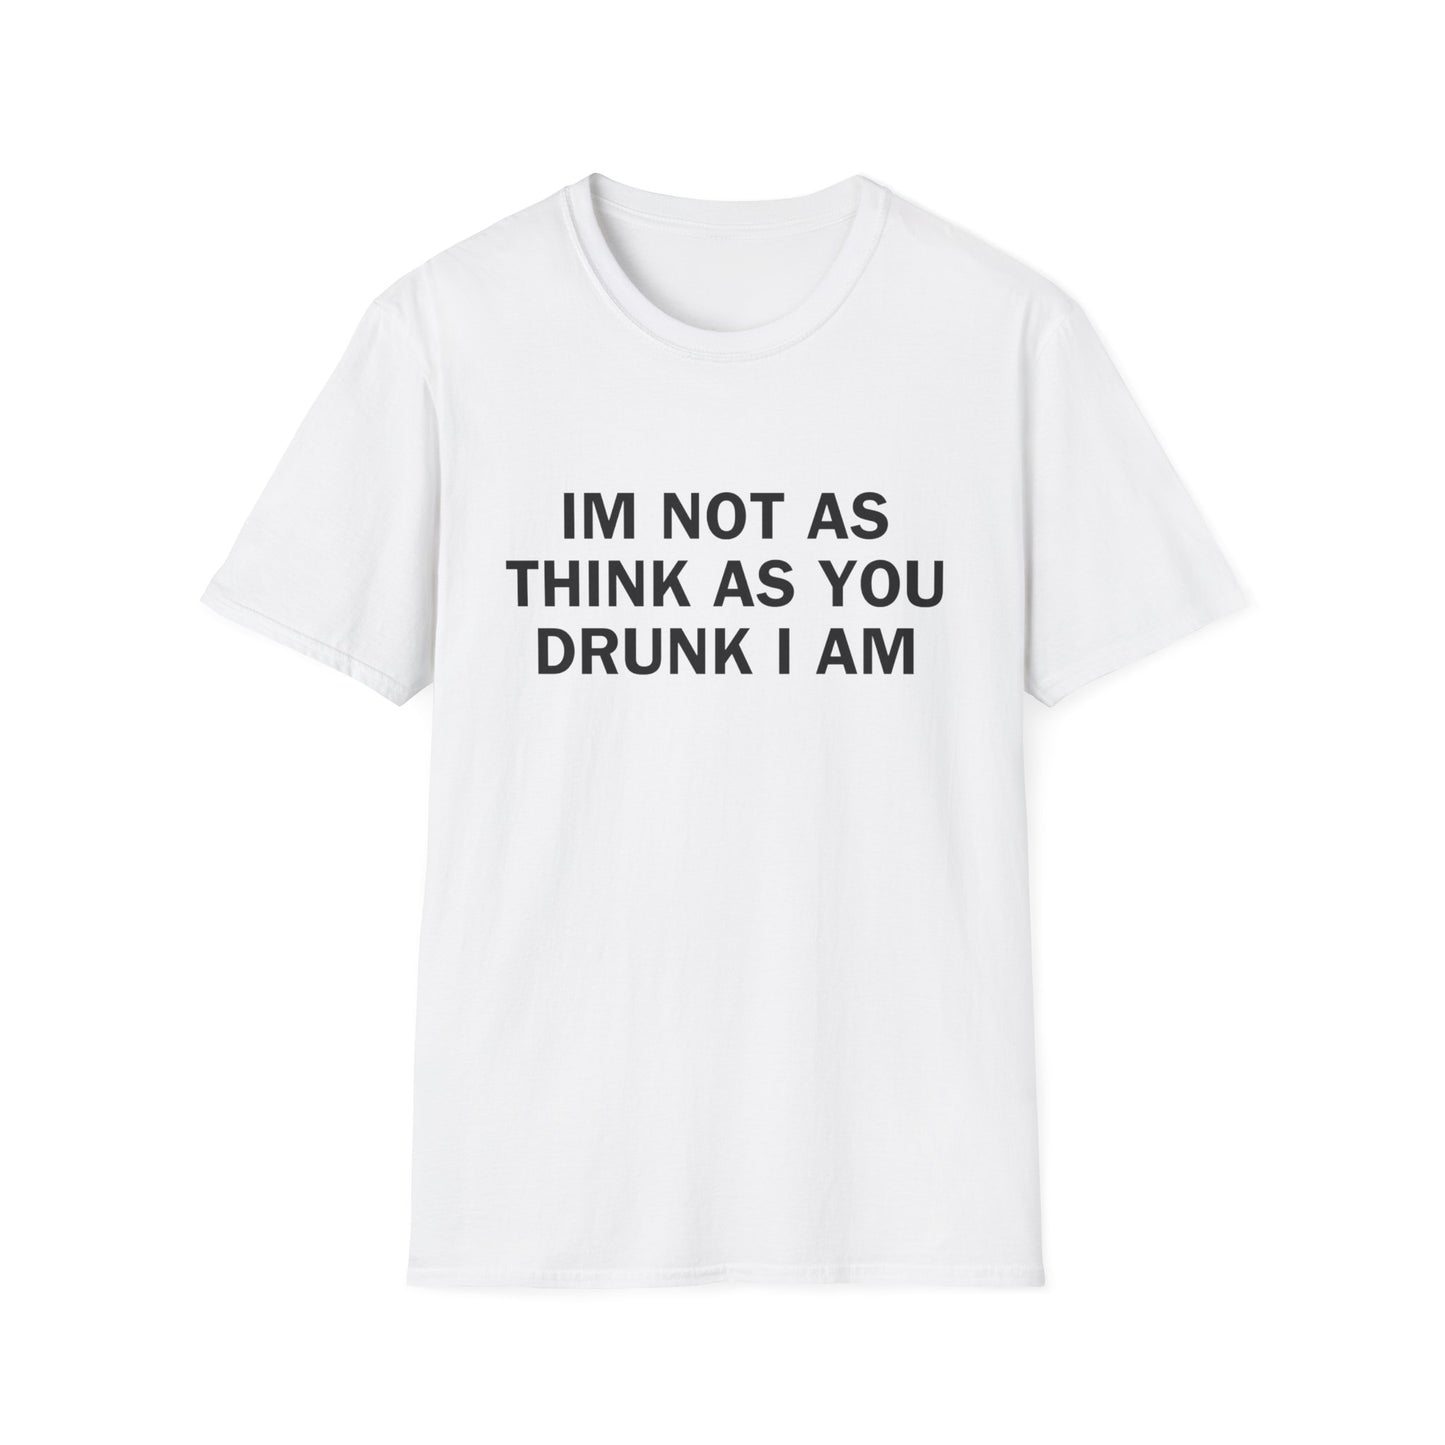 I’m Not As Drunk As You Think I Am T-Shirt